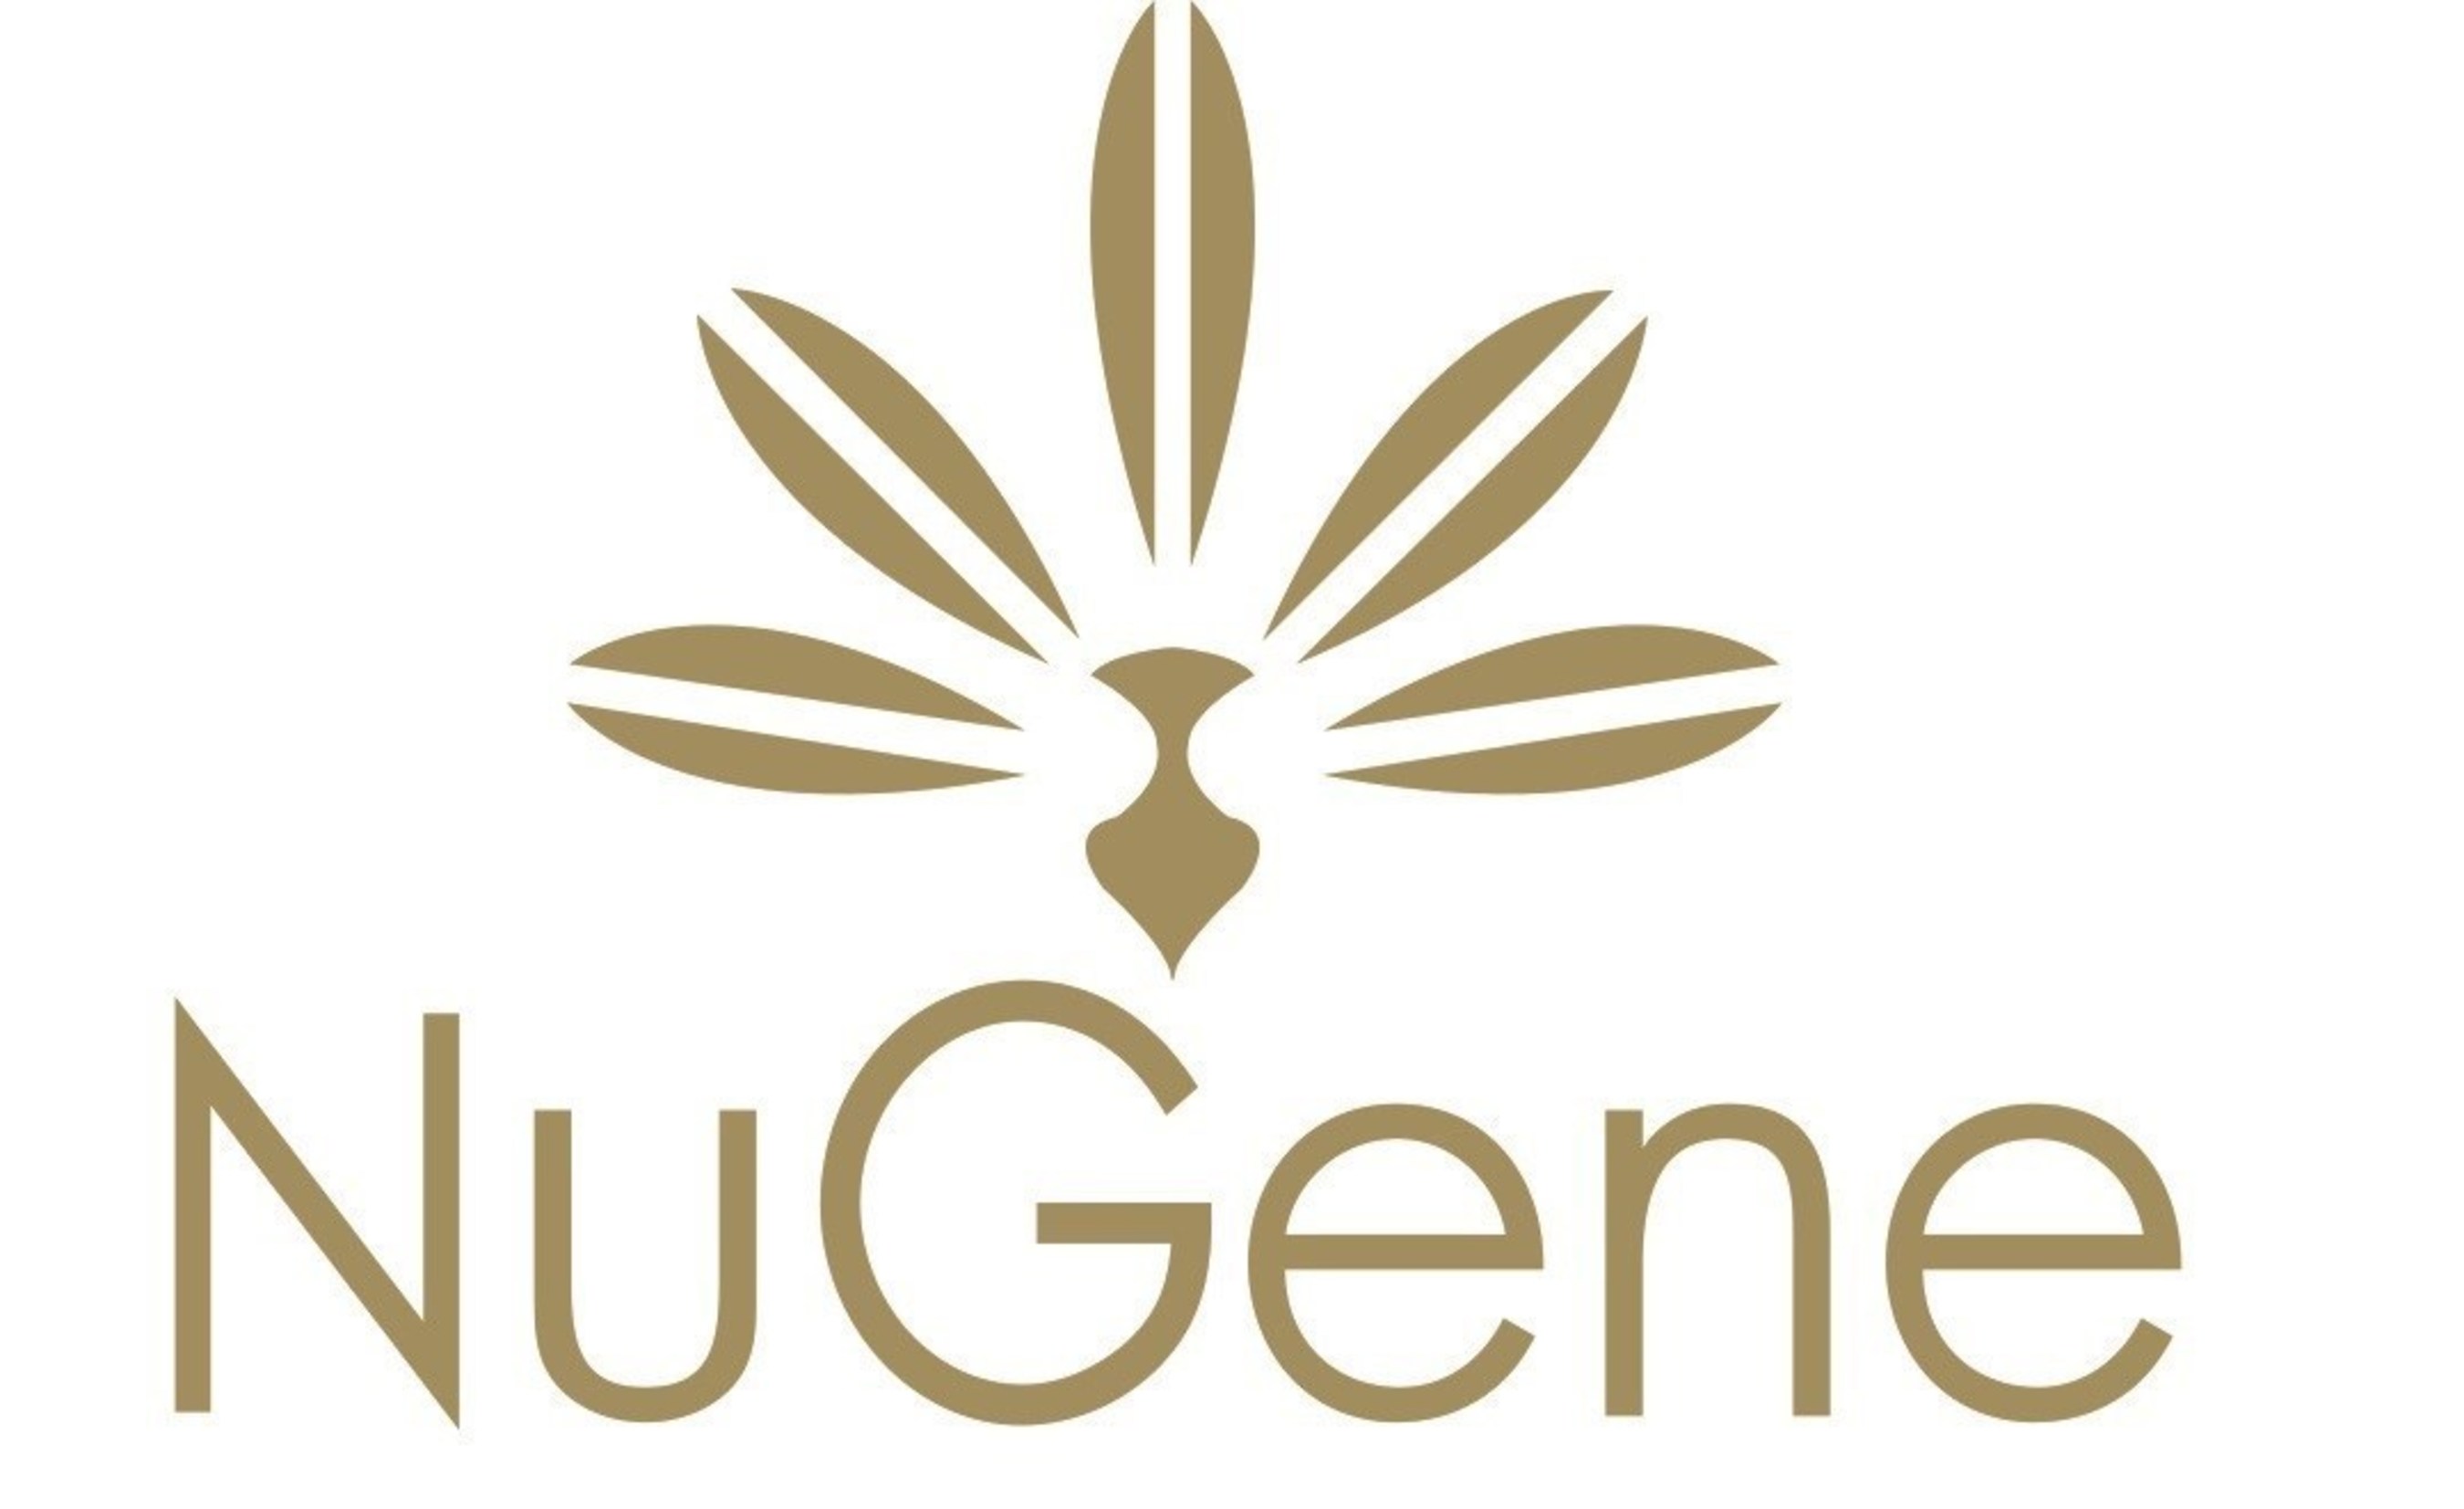 NuGene International is the maker of age-defying aesthetic products for skin and hair rejuvenation developed from adult stem cells.